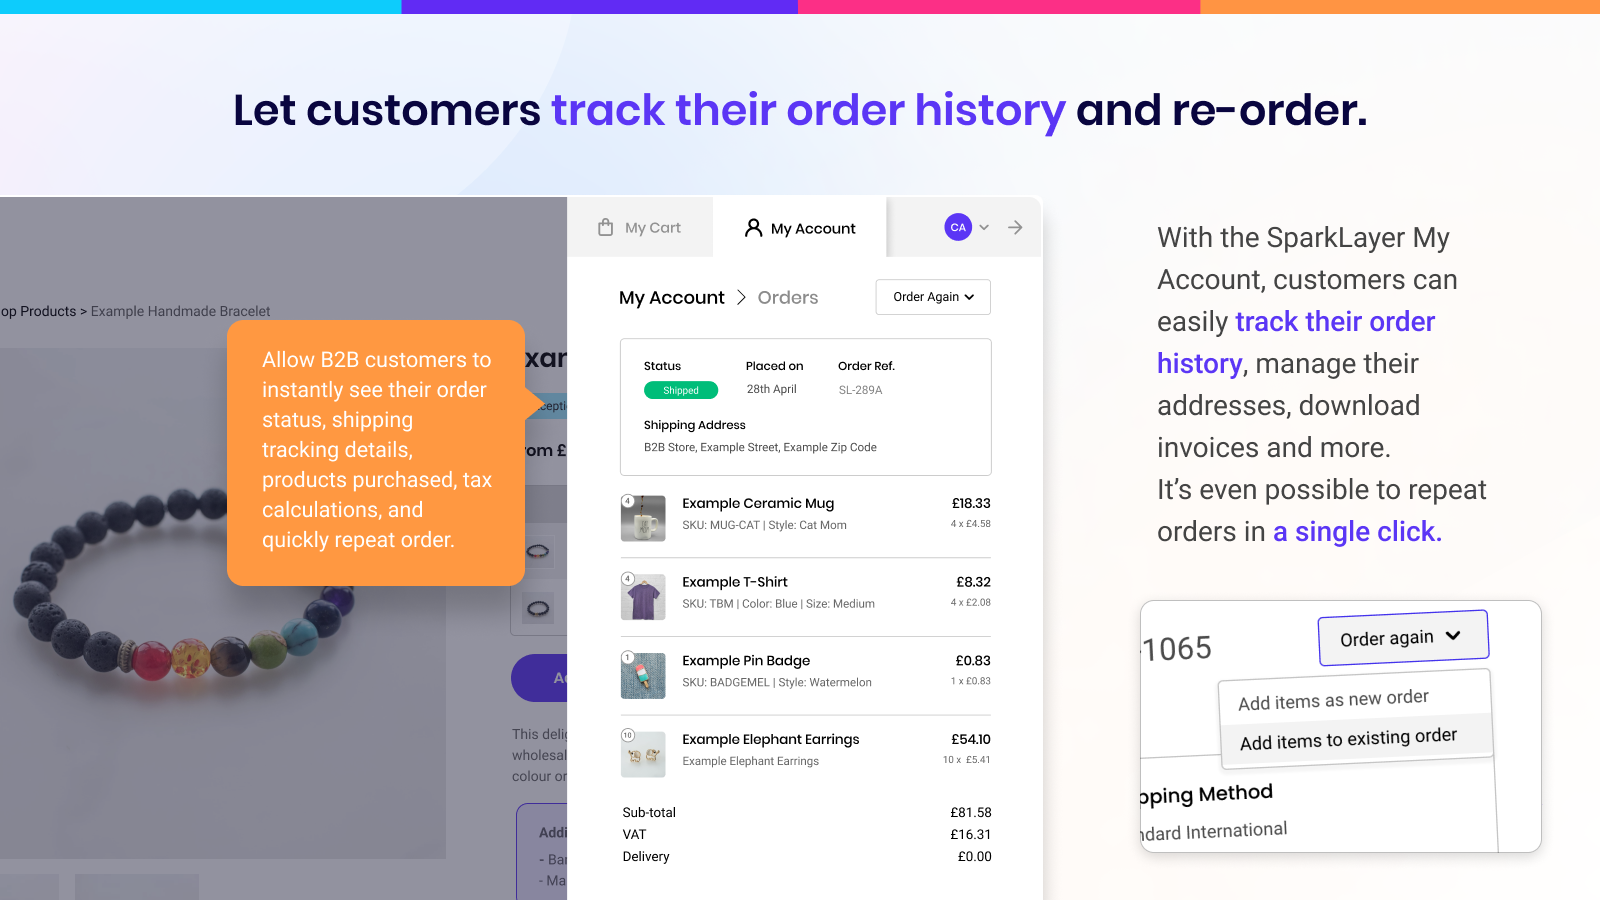 Let customers track their order history and re-order.